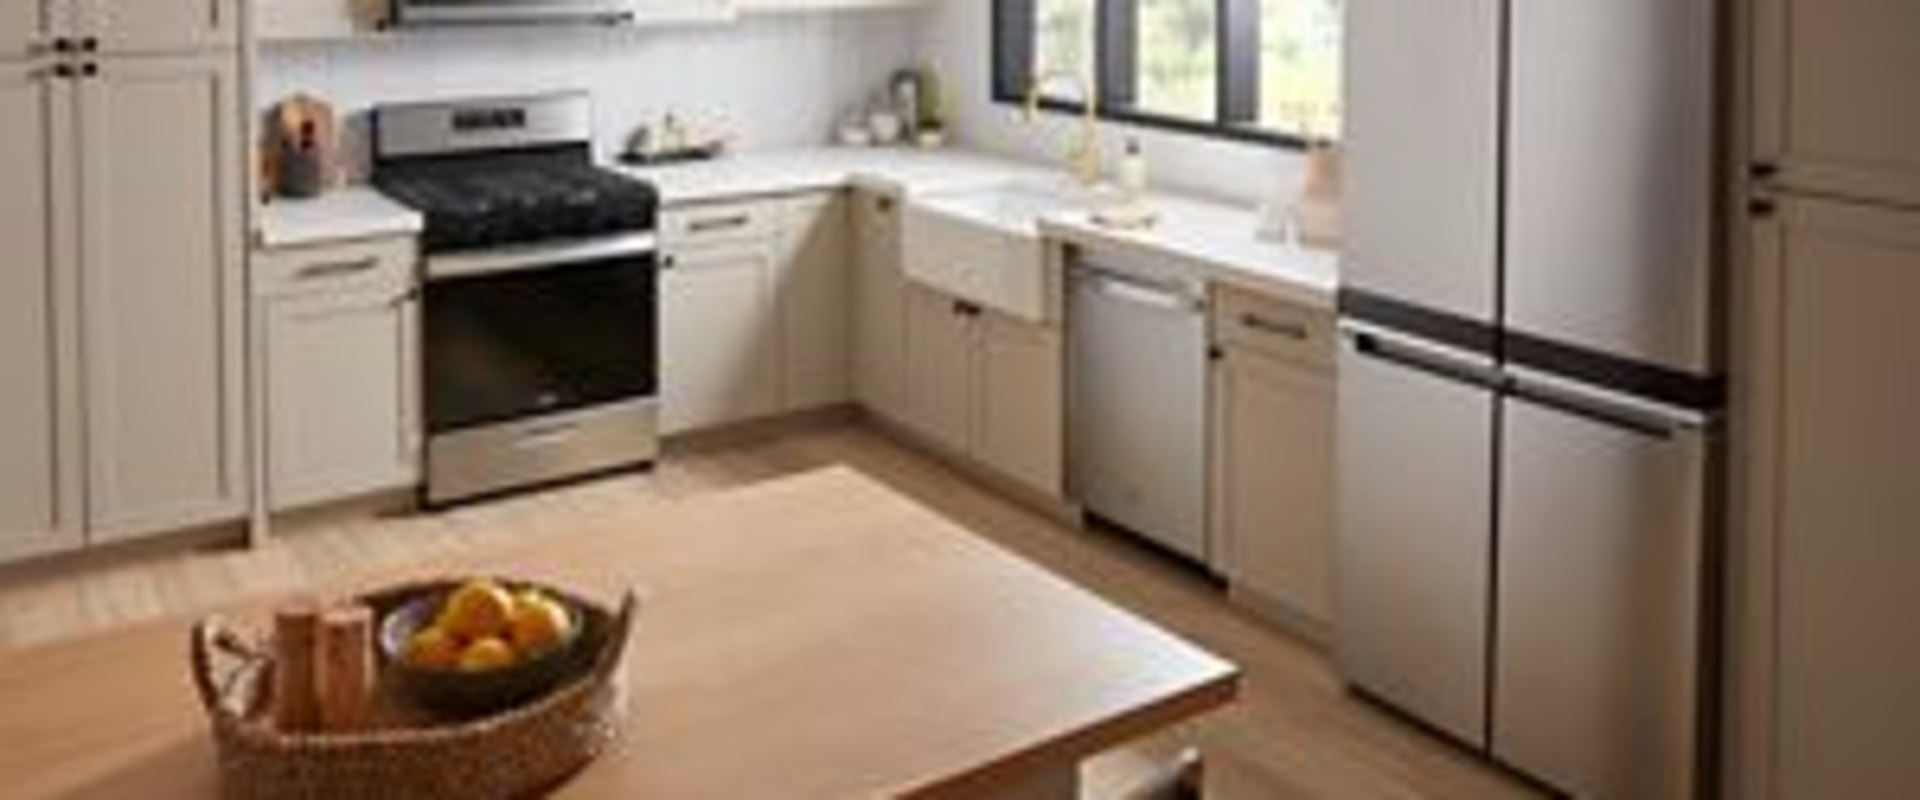 Replacing Outdated Appliances: How to Upgrade Your Kitchen and Improve Your Home